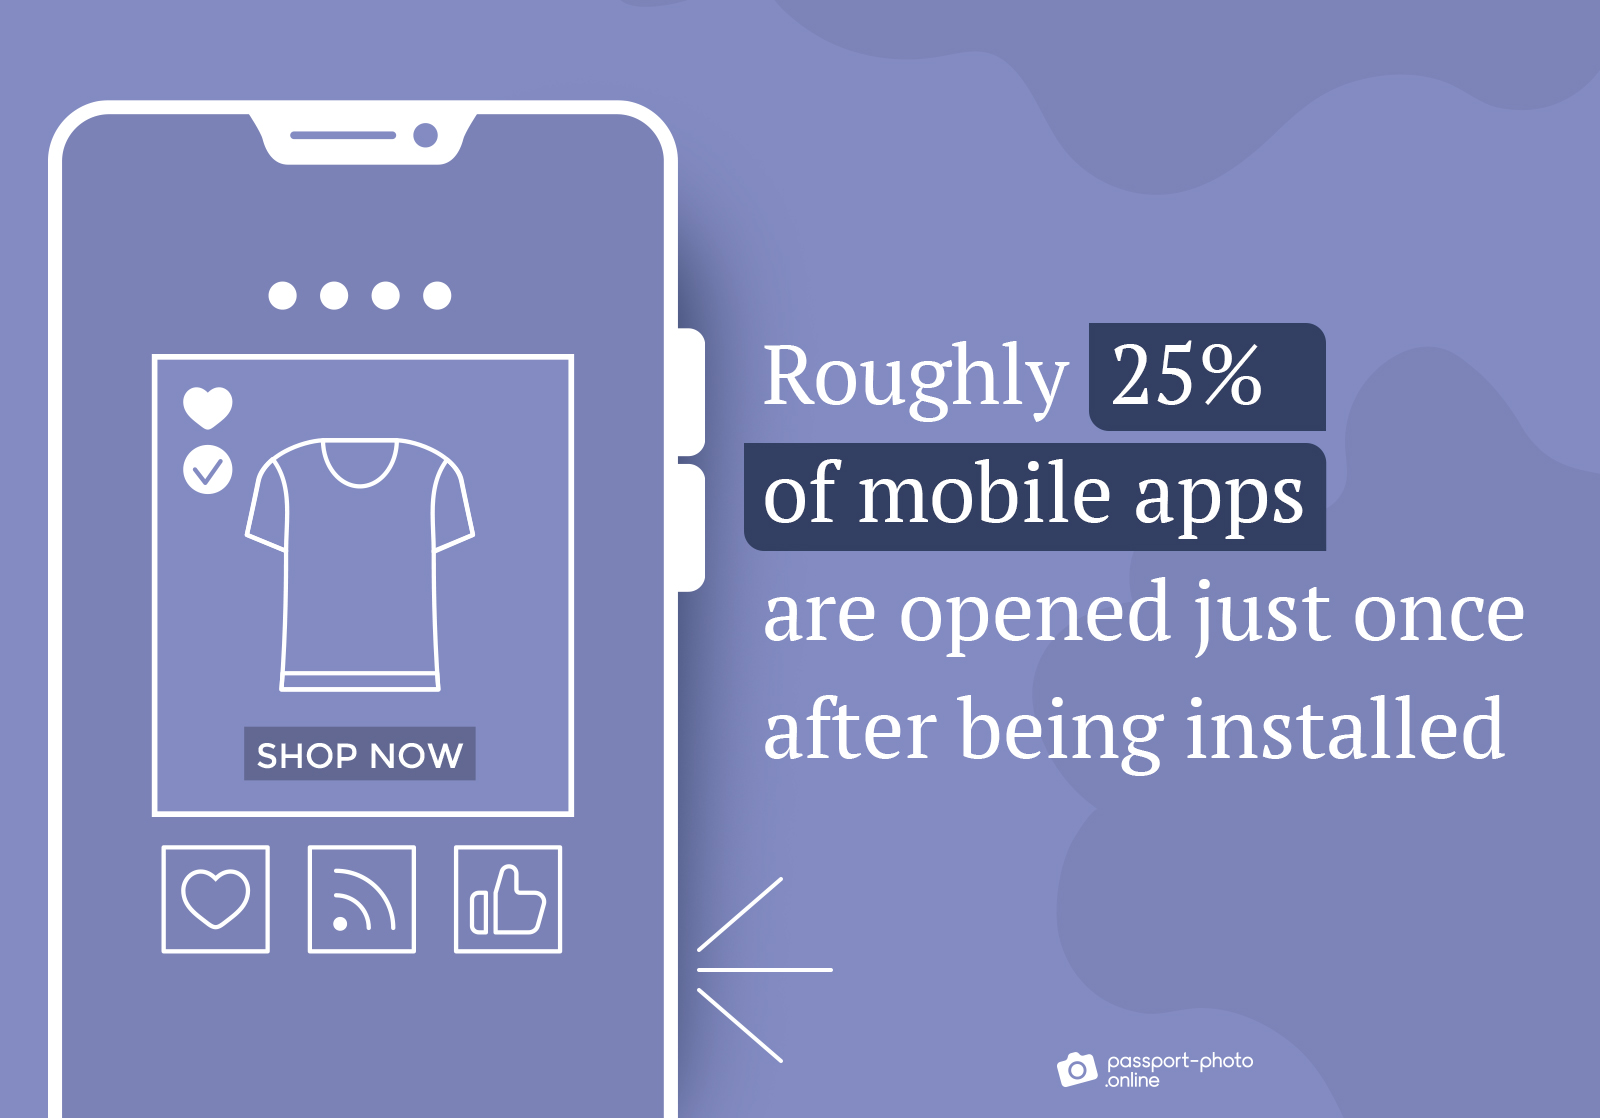 ~25% of mobile apps are opened just once after being installed